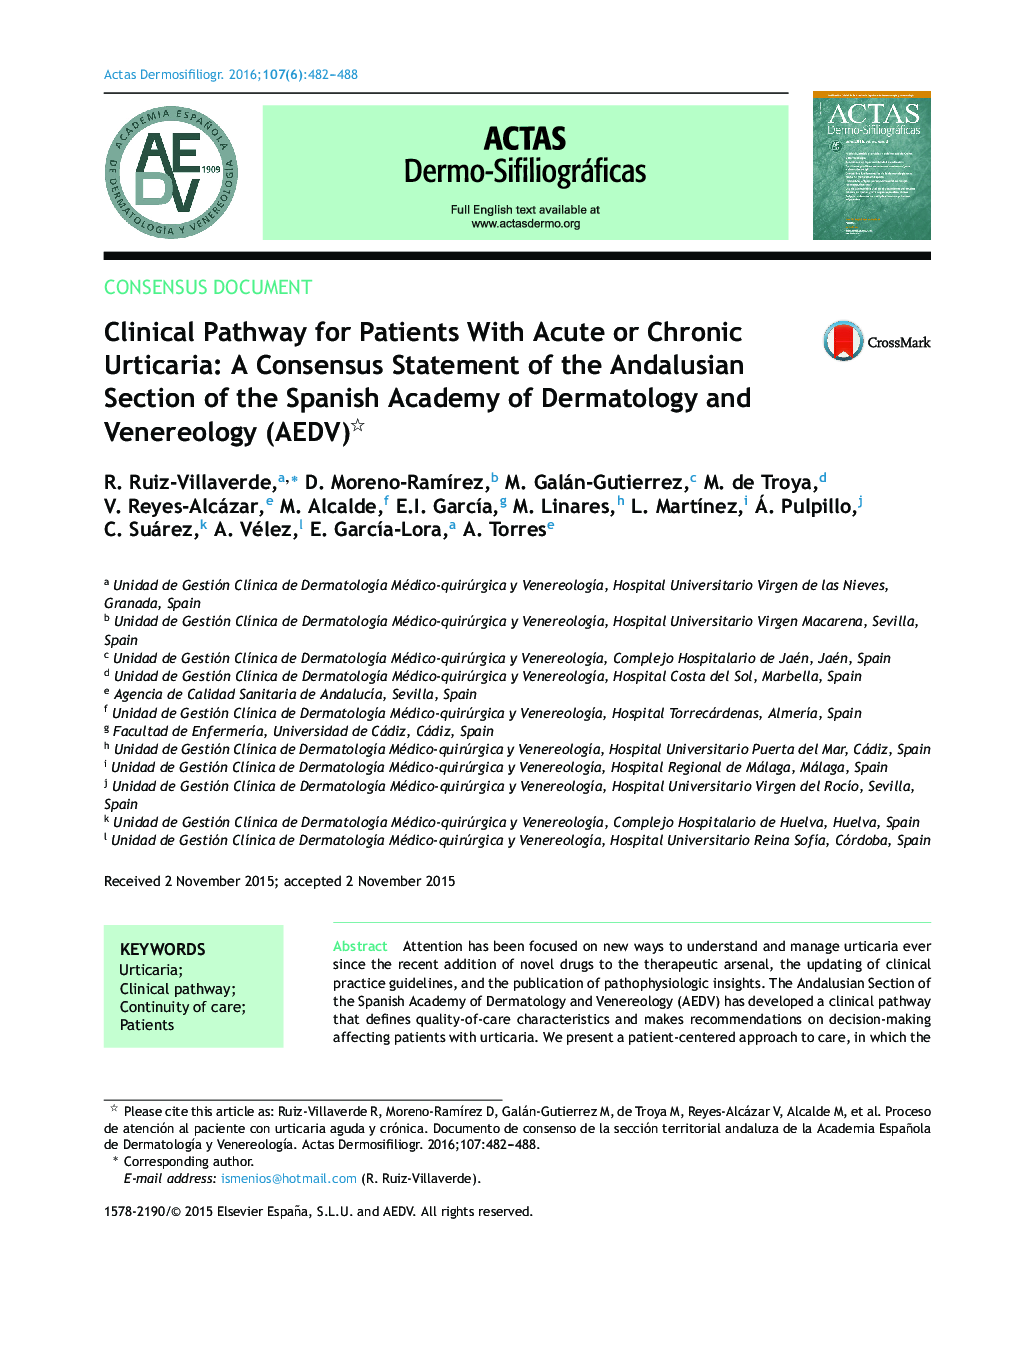 Clinical Pathway for Patients With Acute or Chronic Urticaria: A Consensus Statement of the Andalusian Section of the Spanish Academy of Dermatology and Venereology (AEDV) 